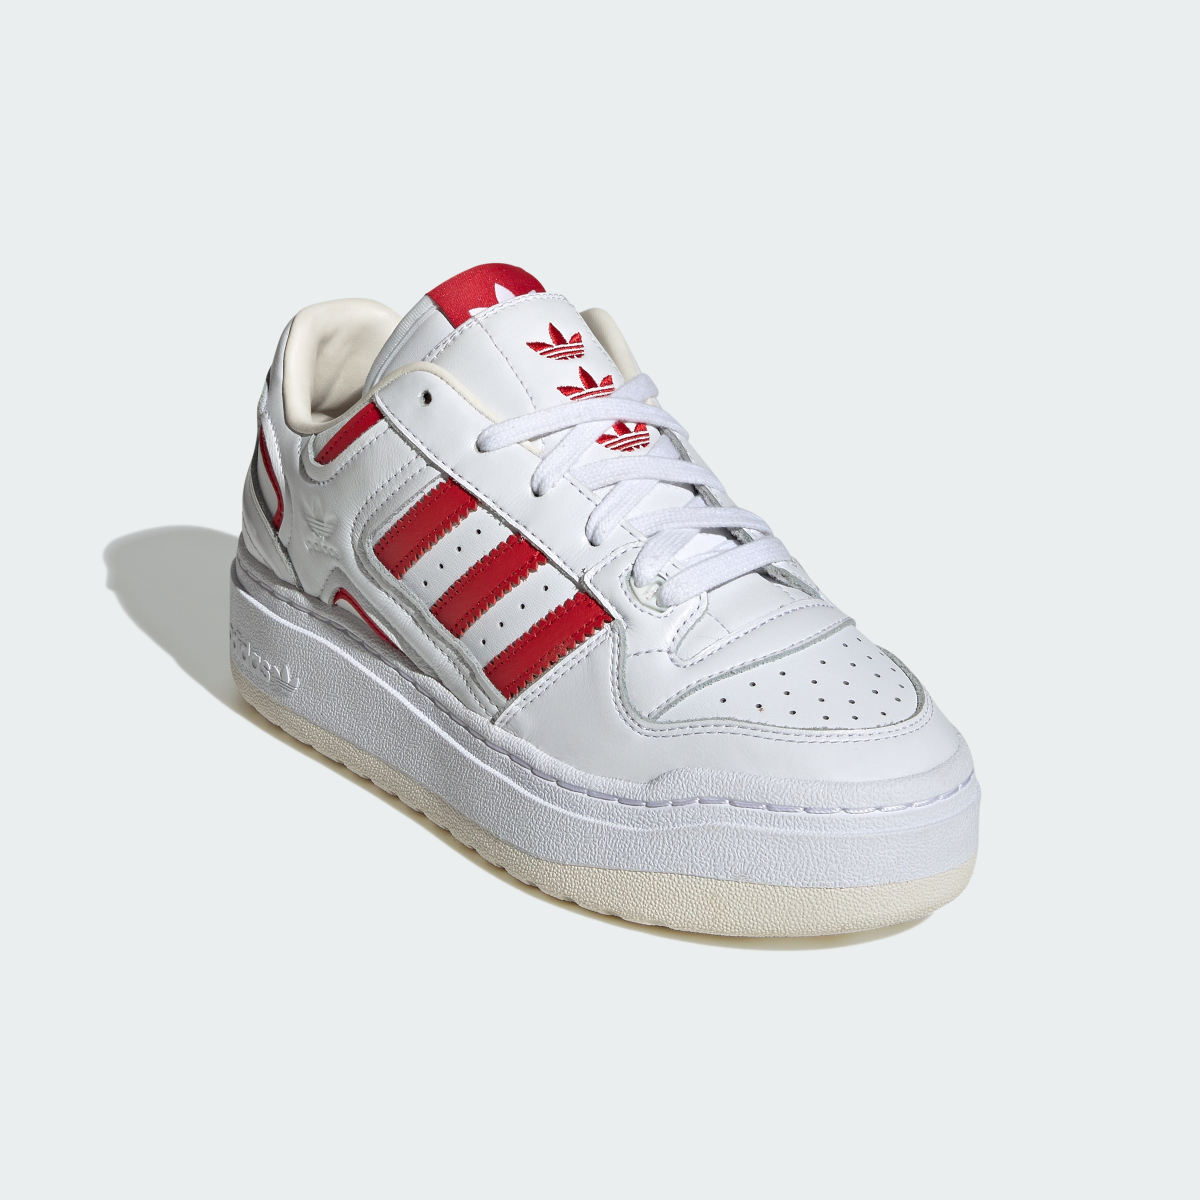 Adidas Chaussure Forum XLG. 5